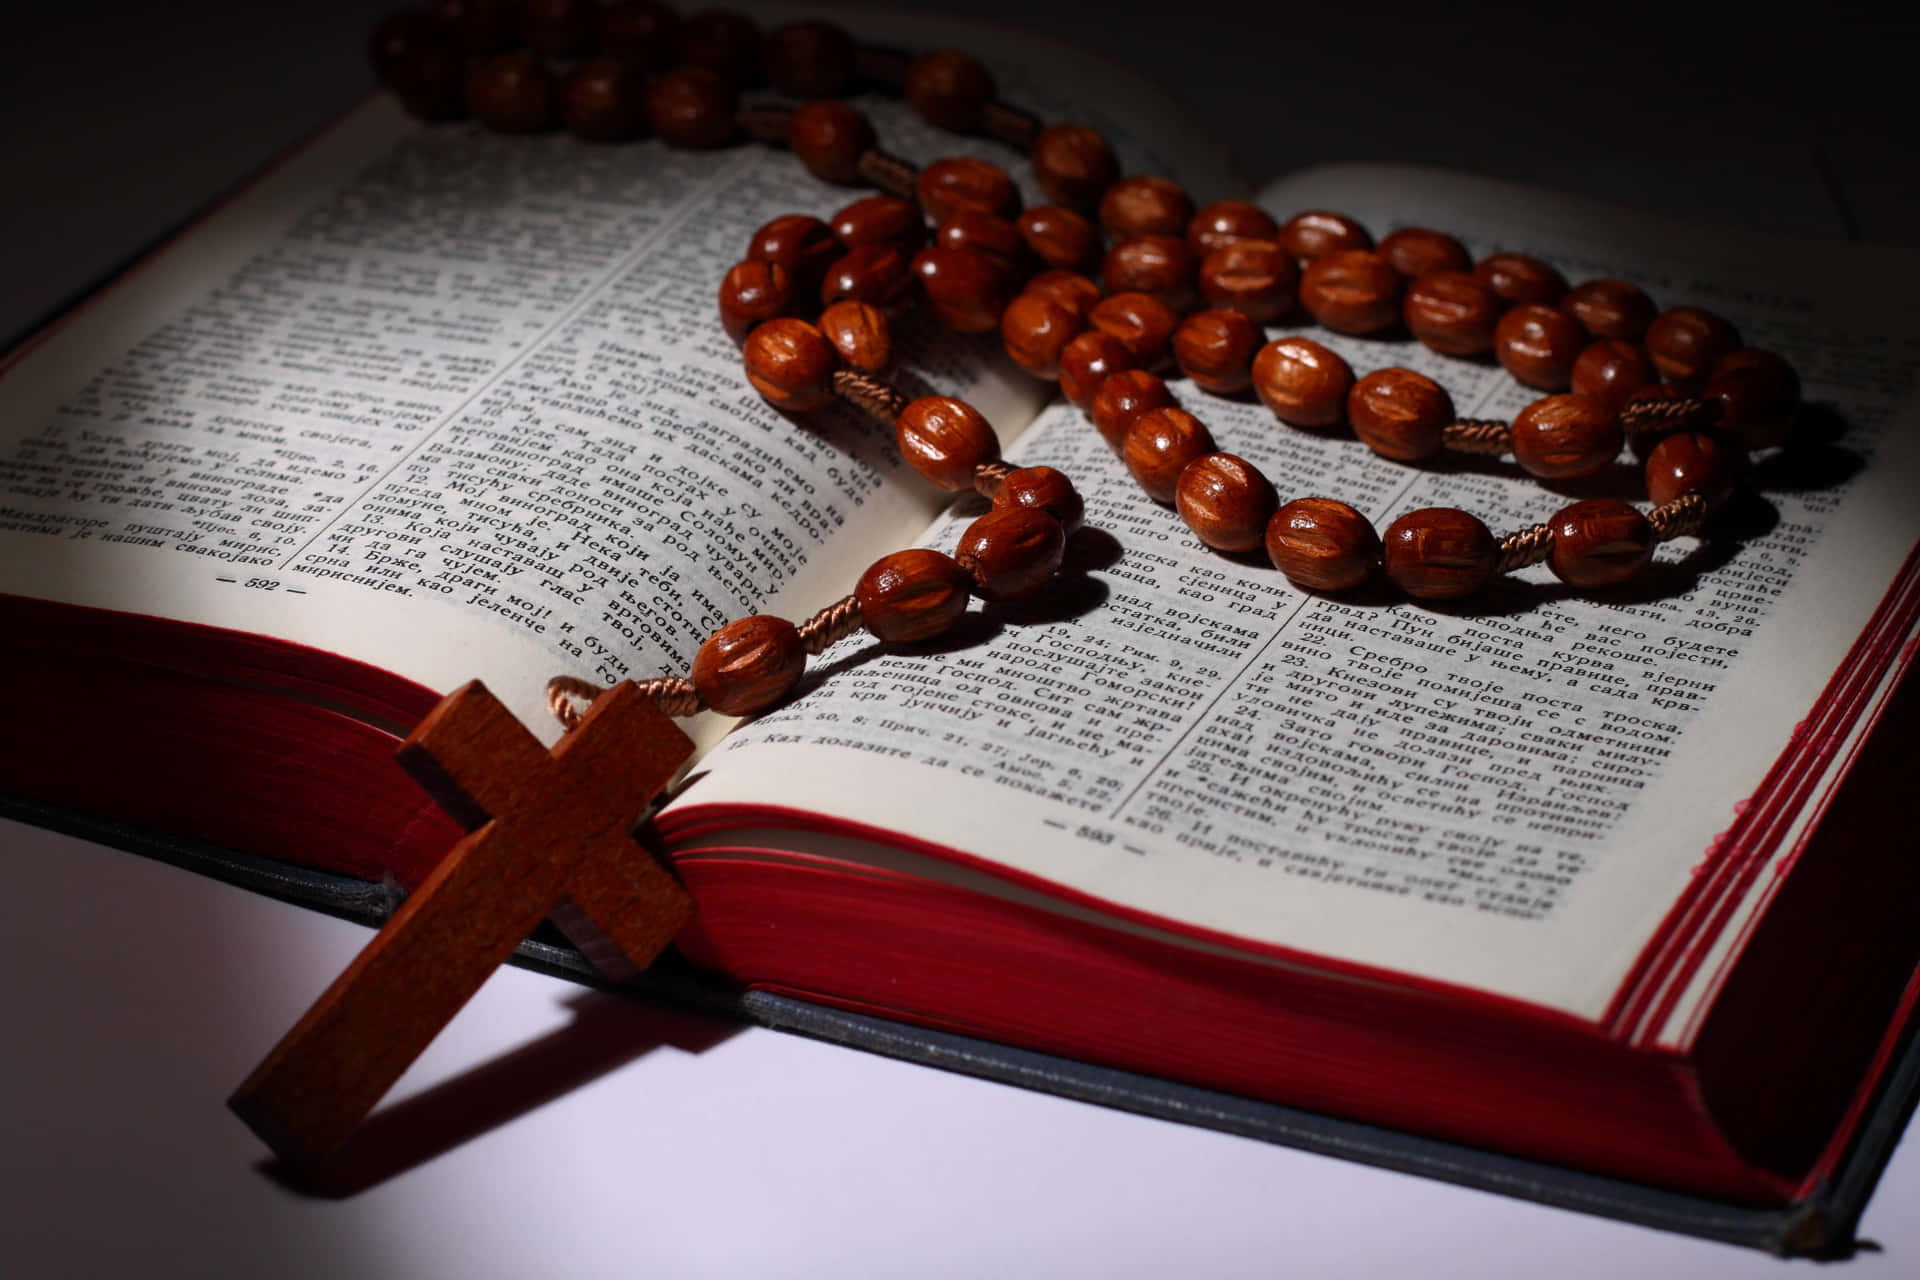 Exquisite Rosary Beads in Serene Atmosphere